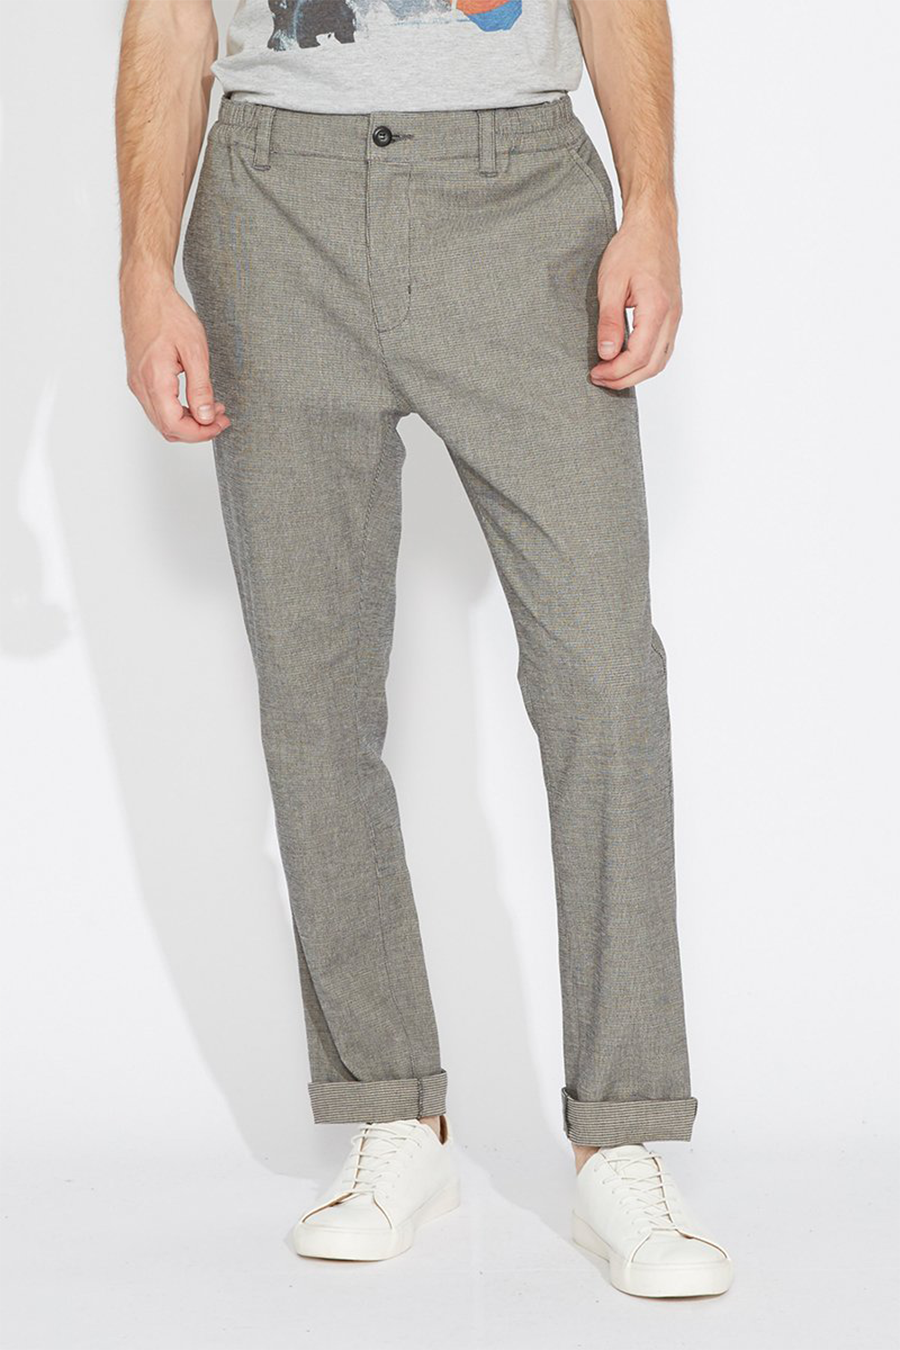 Tilden Slouch Chino | Concrete - Main Image Number 1 of 3